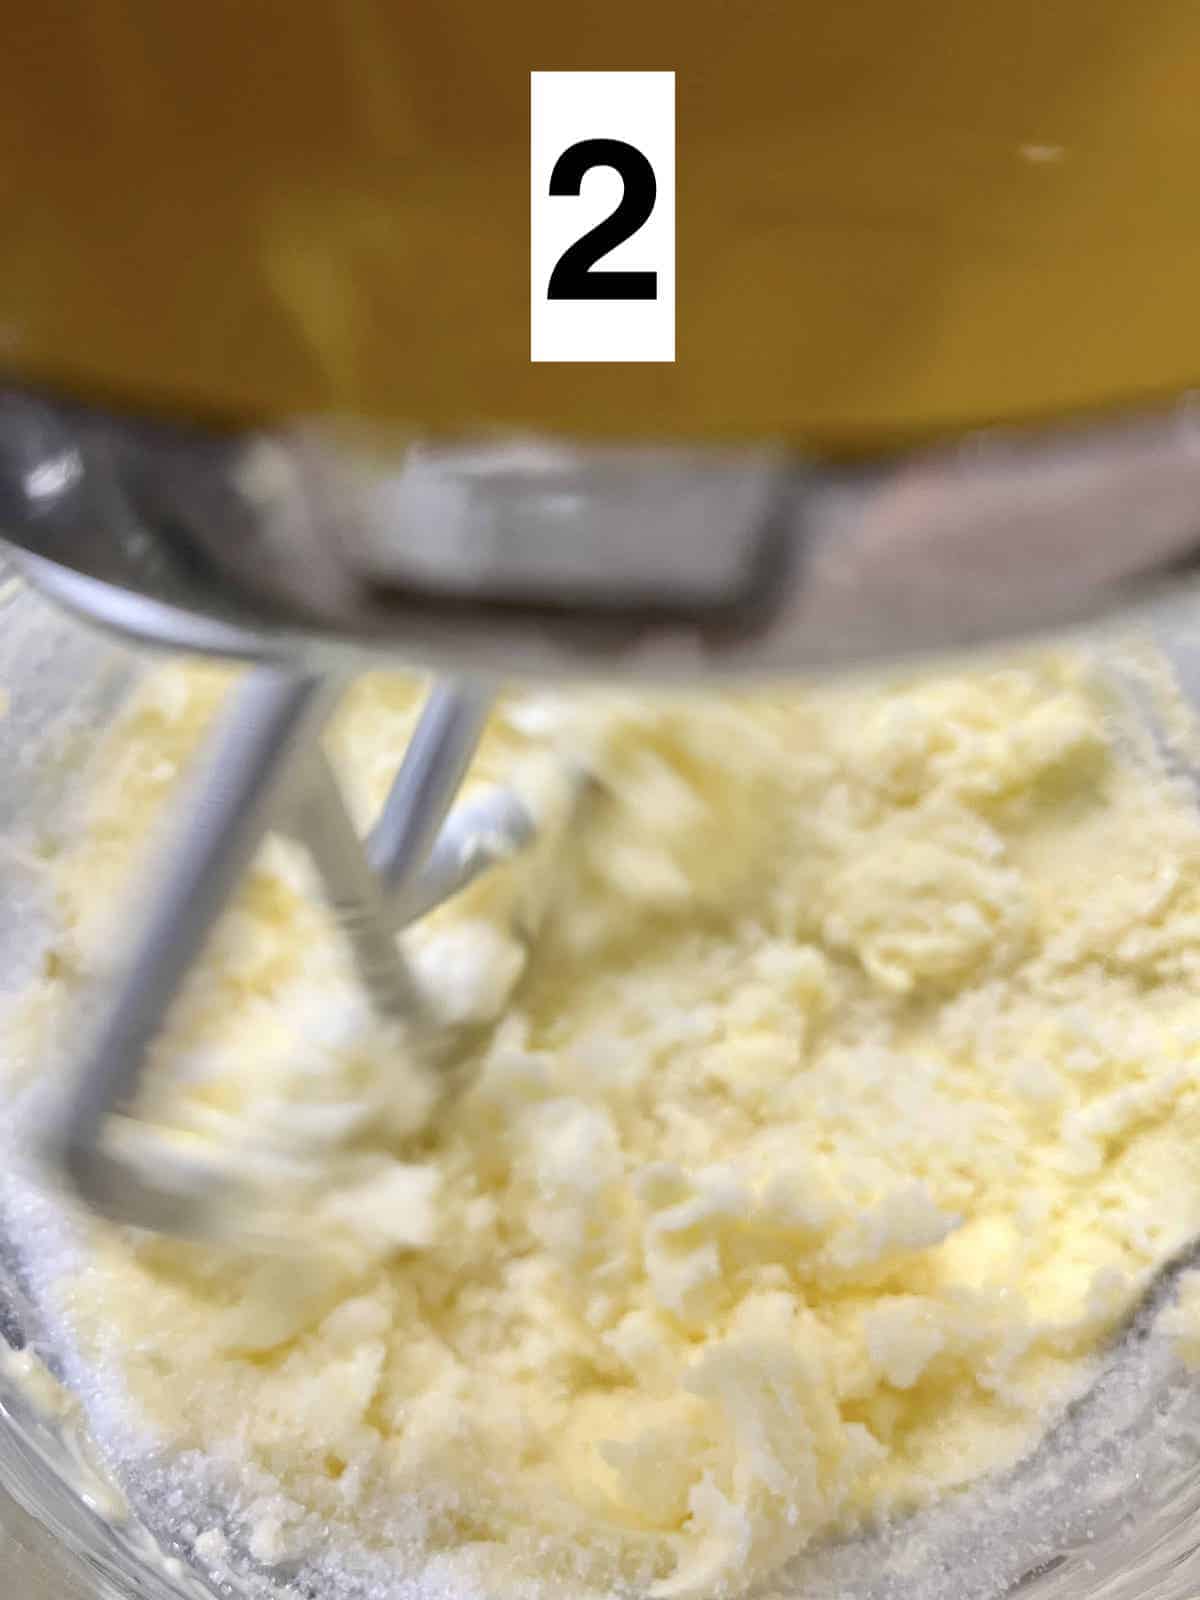 Butter and sugar being creamed in a stand mixer.